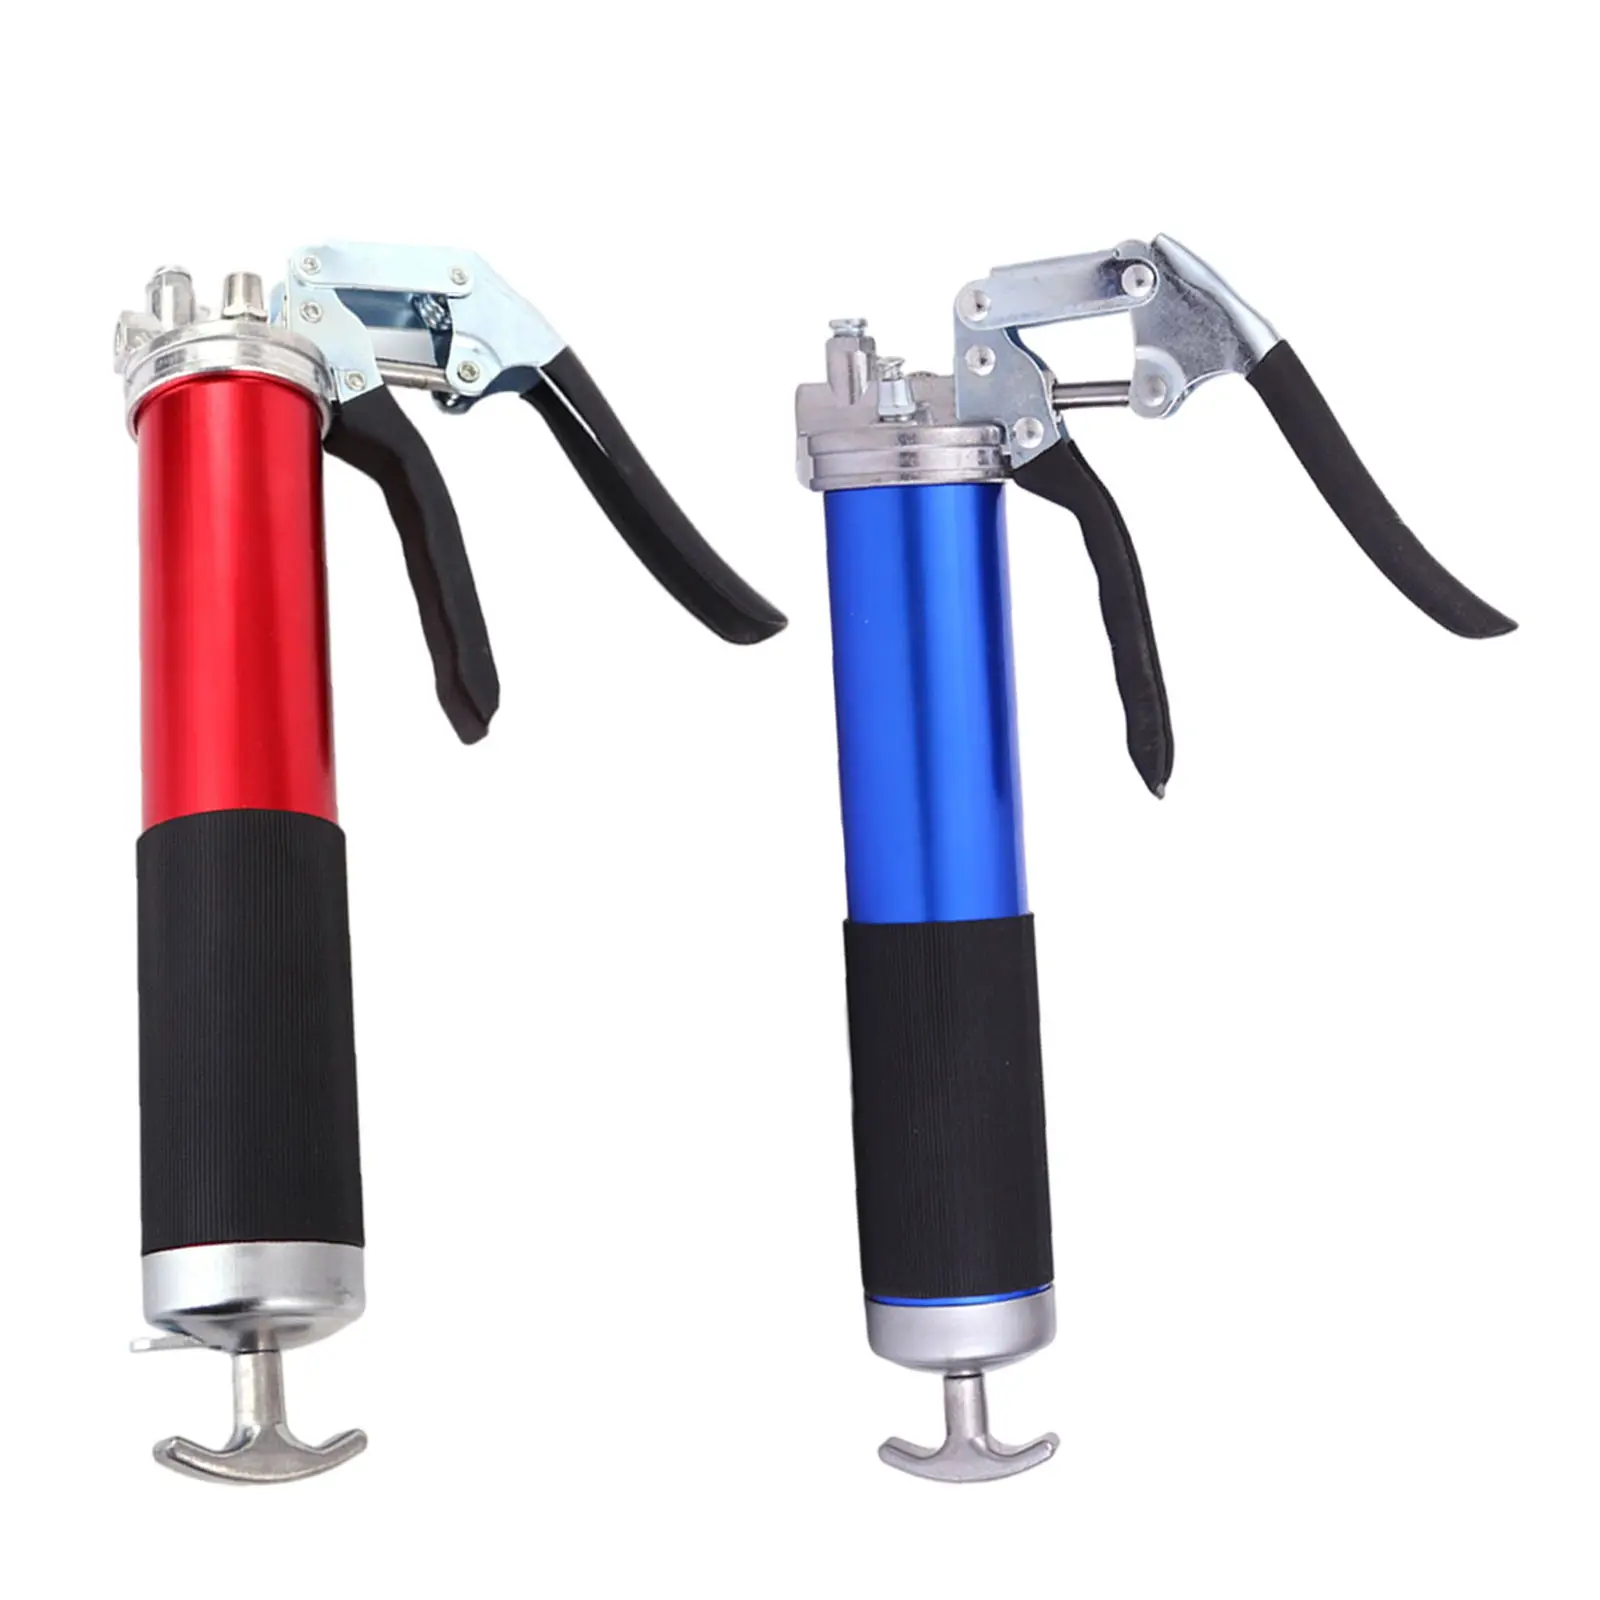 Heavy Duty Metal High Pressure 10000 PSI 400cc Grip Grease Gun Greasing Injection W/ Hose for Automobile Tool